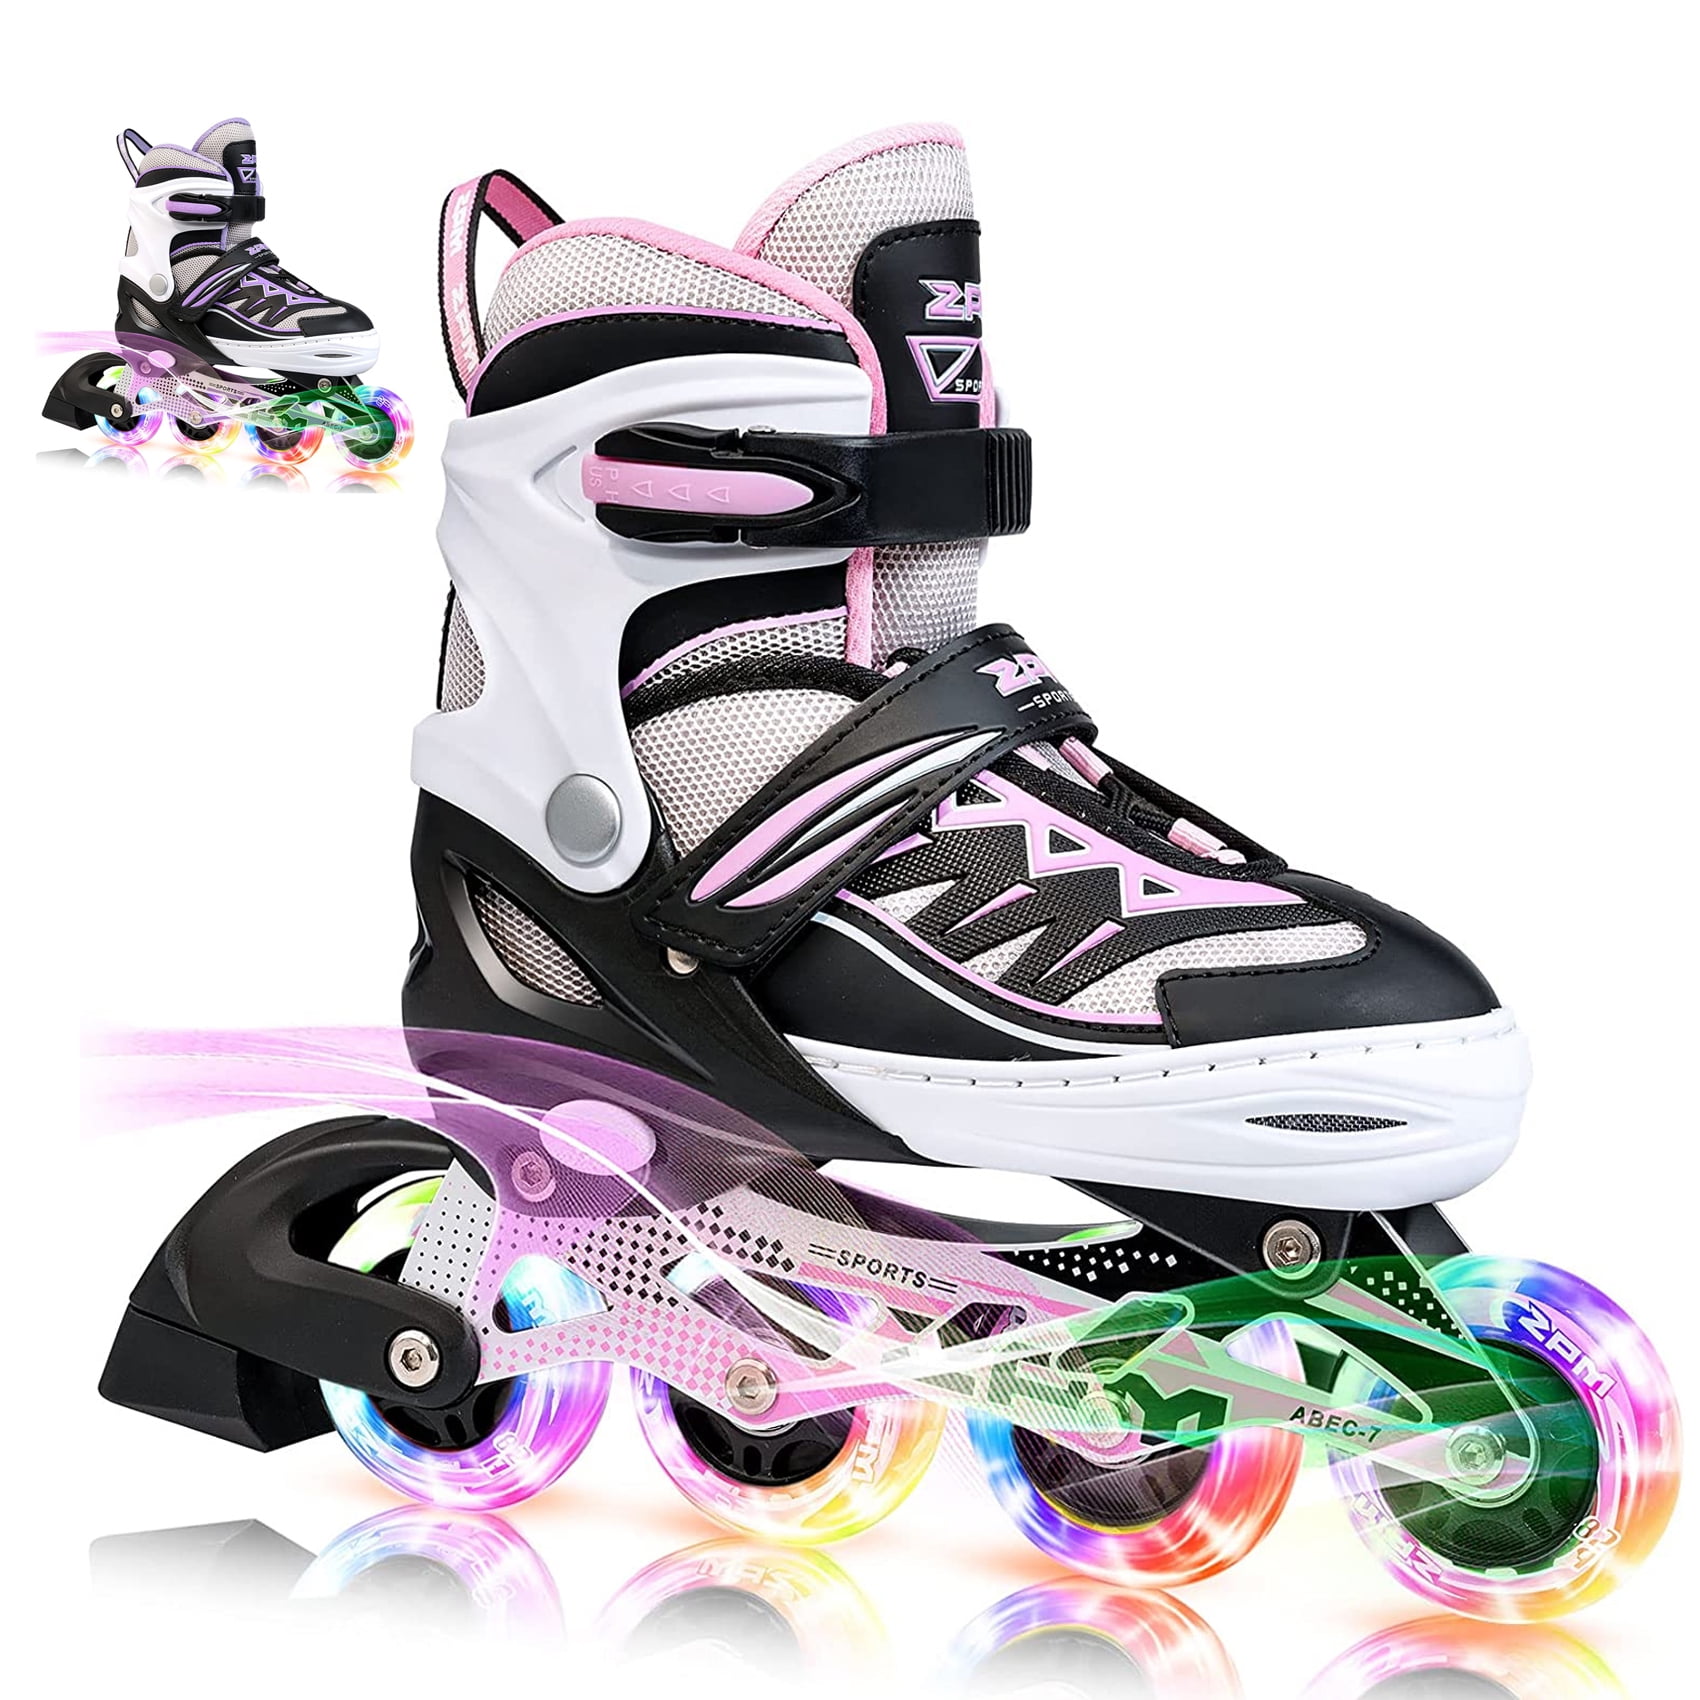 Roller Skates with Featuring Details about   ITurnGlow Adjustable Inline Skates for Kids and s 